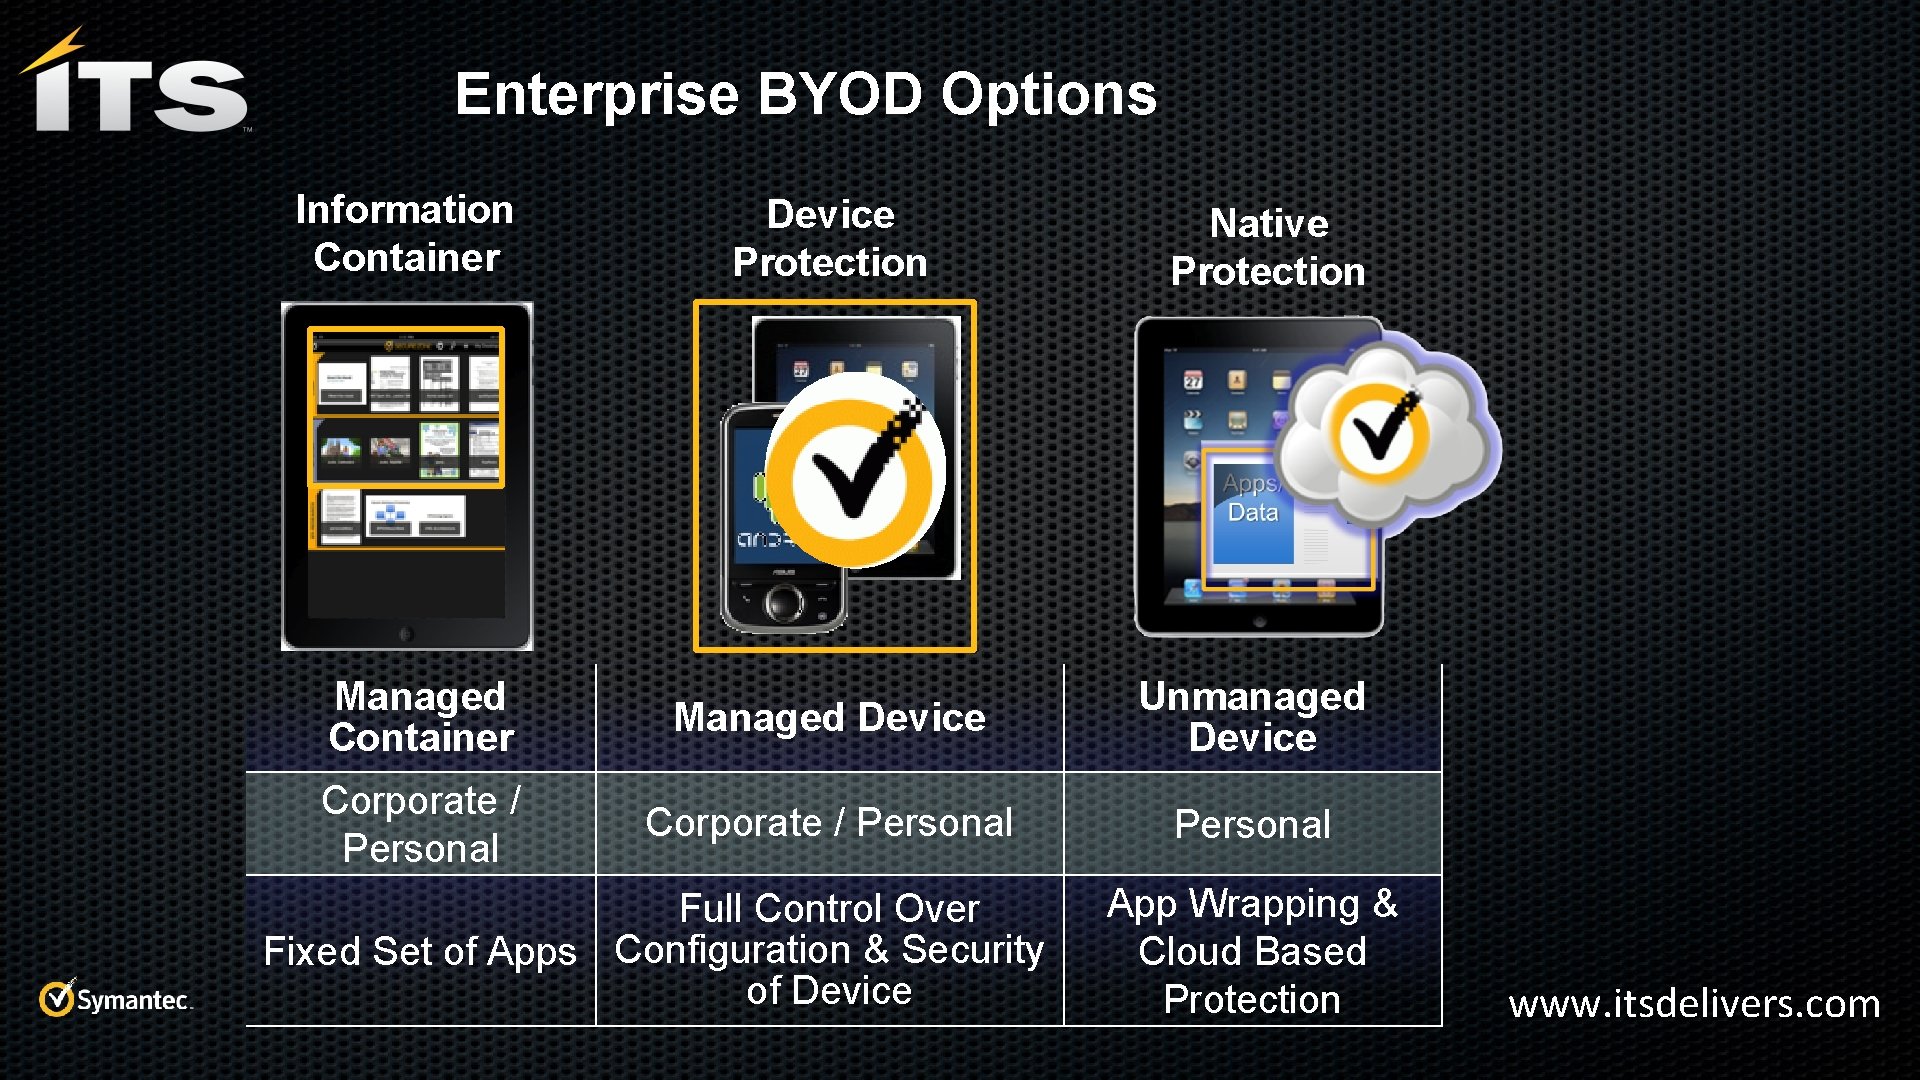 Enterprise BYOD Options Information Container Device Protection Native Protection Managed Container Managed Device Unmanaged